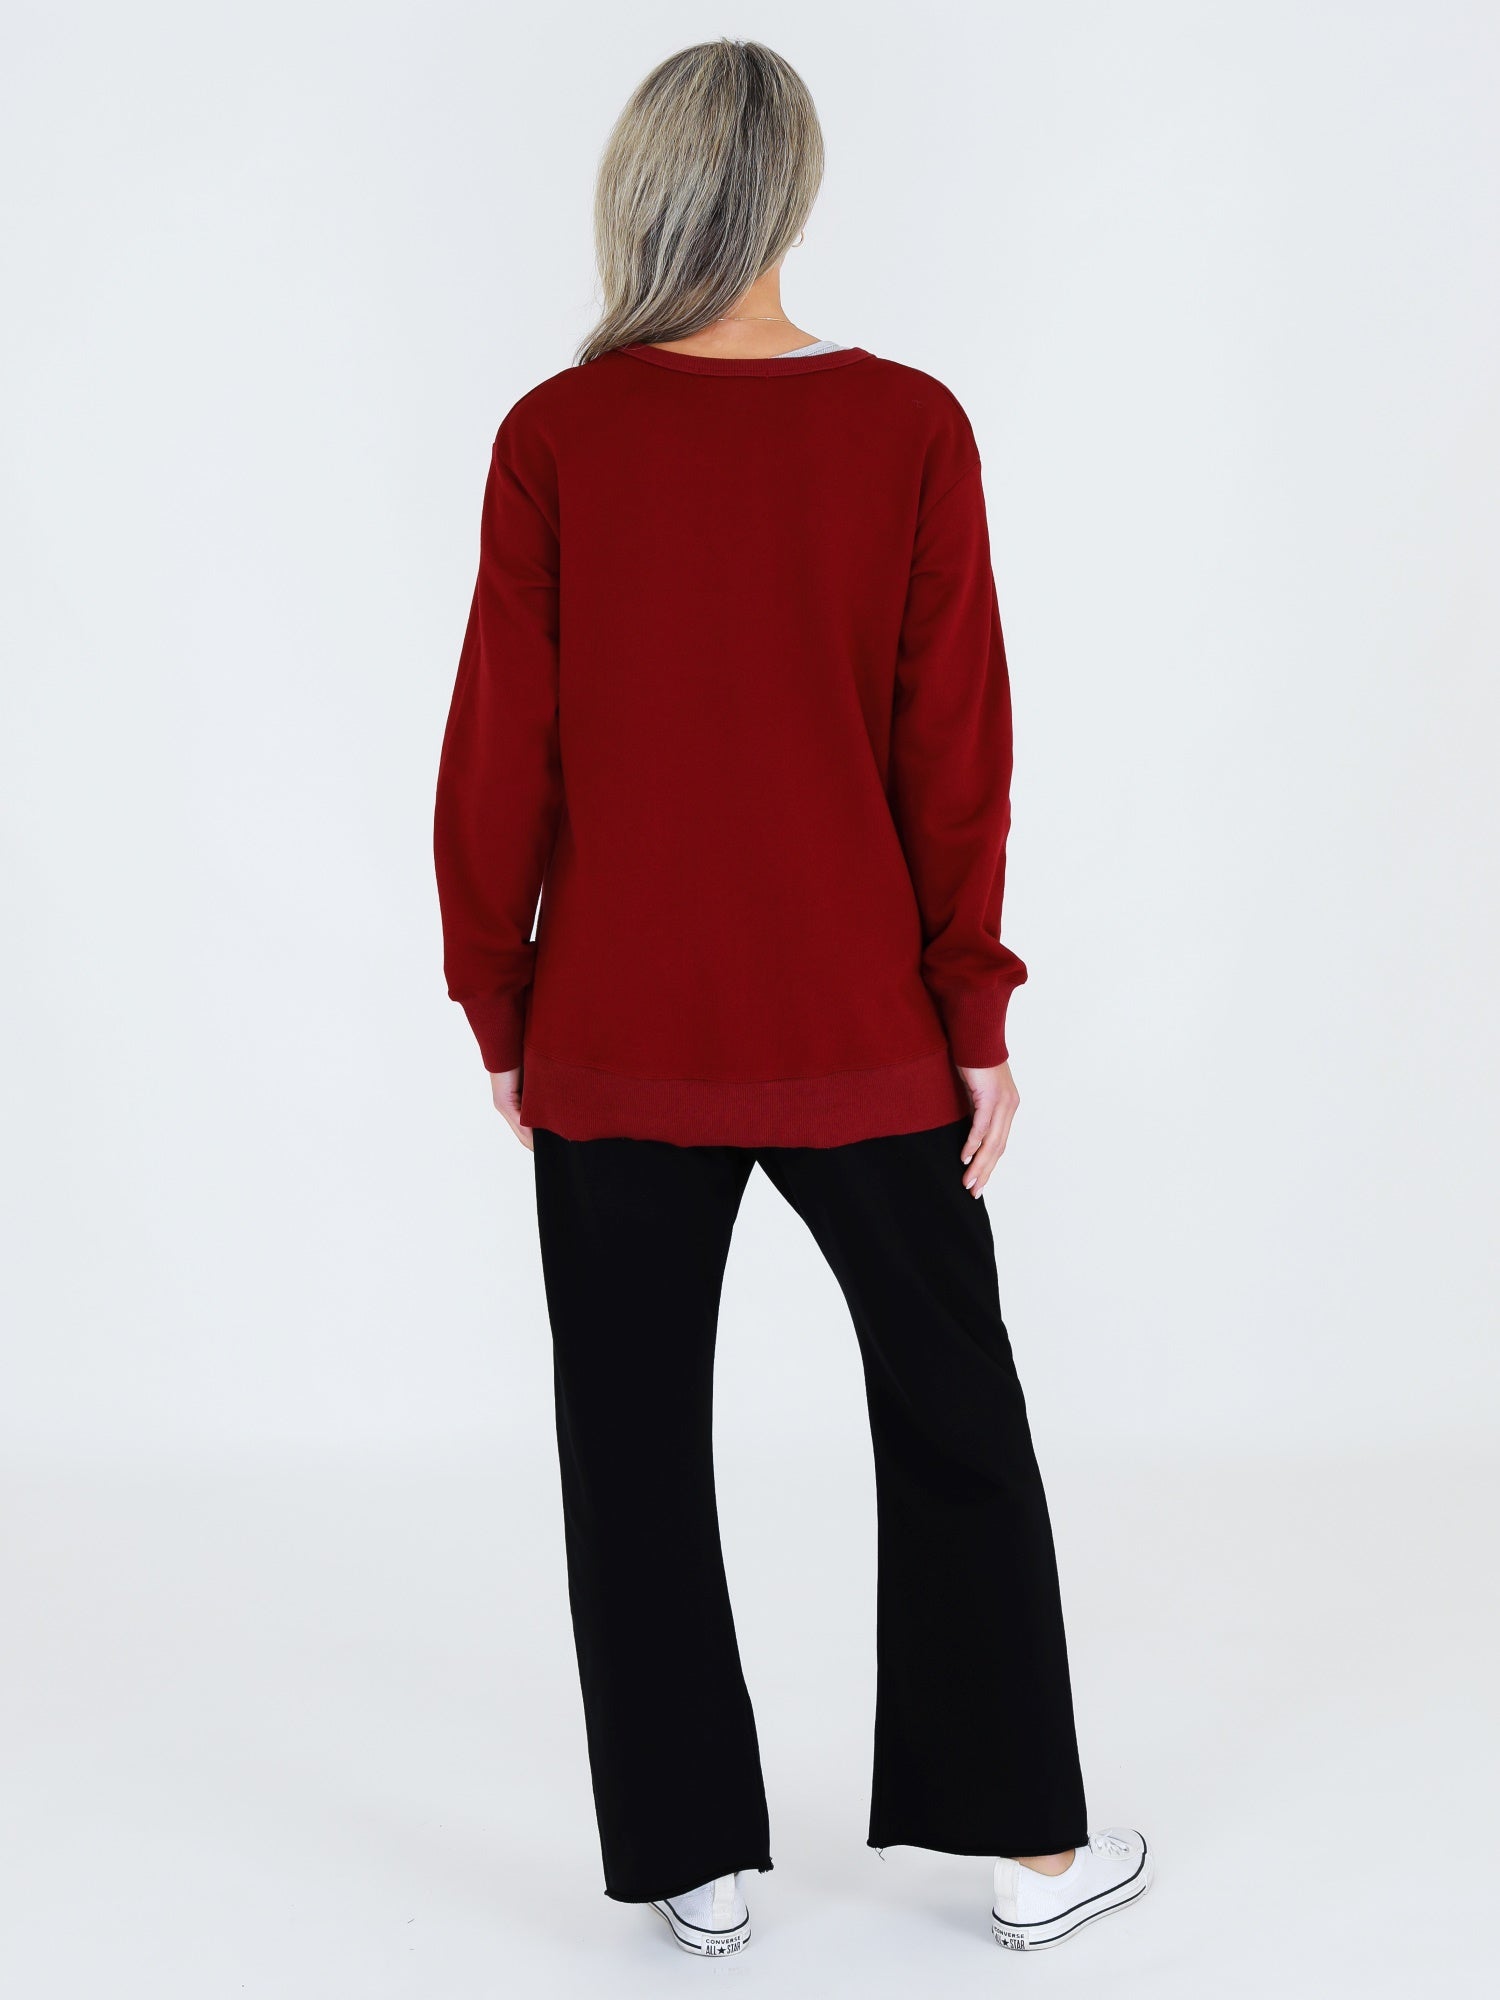 red top women #color_cranberry